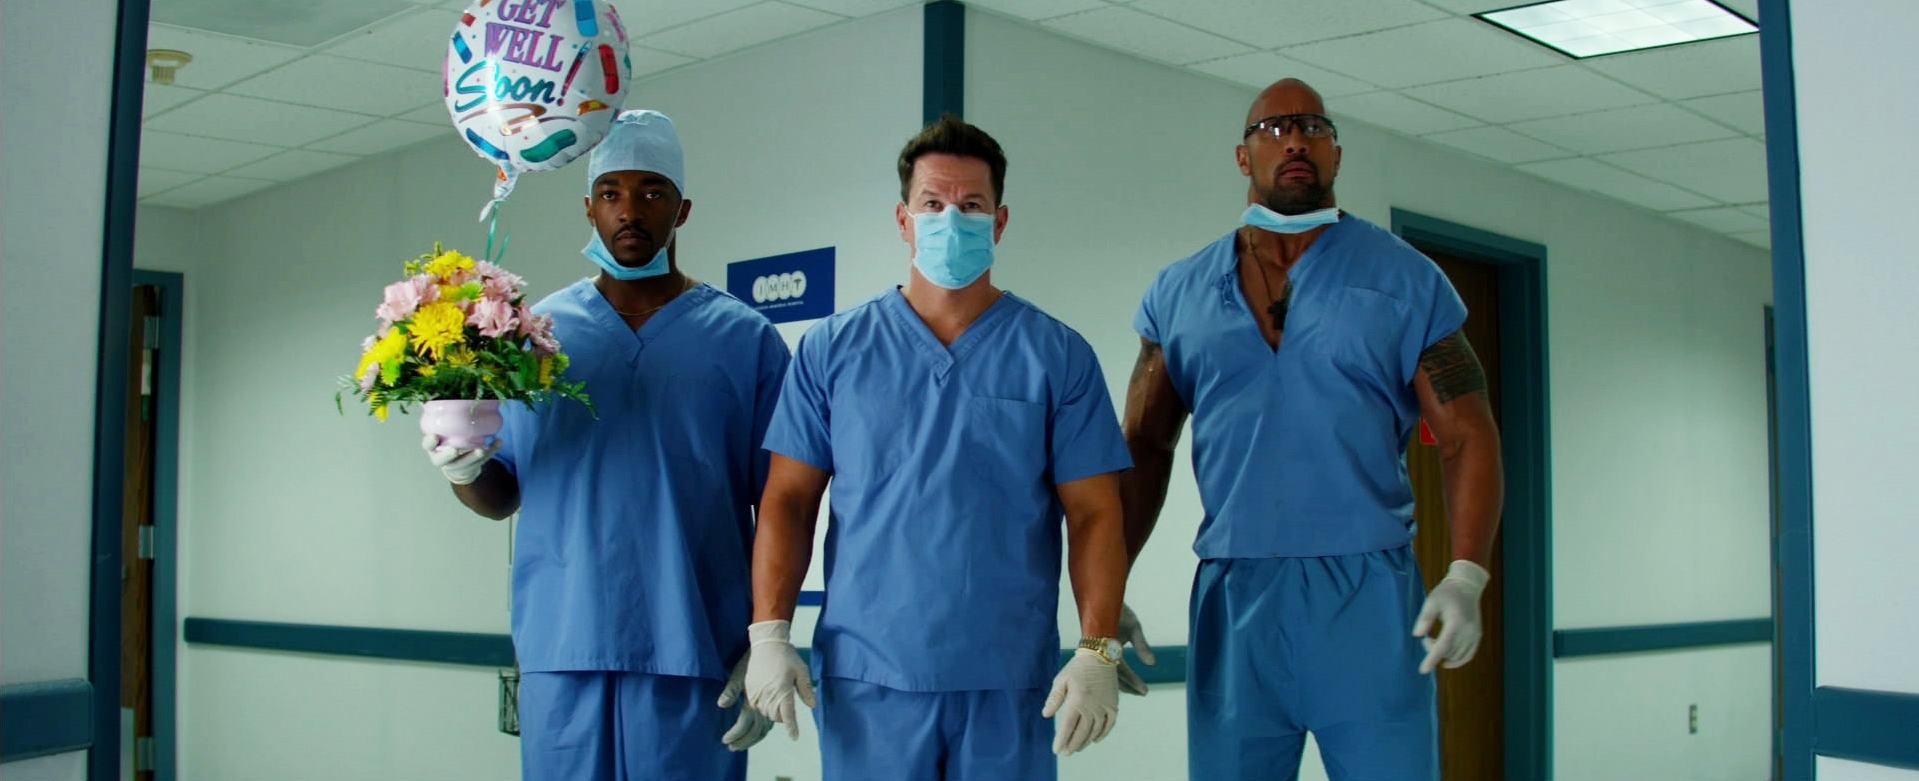 Still of Mark Wahlberg, Dwayne Johnson and Anthony Mackie in Kulturistai (2013)